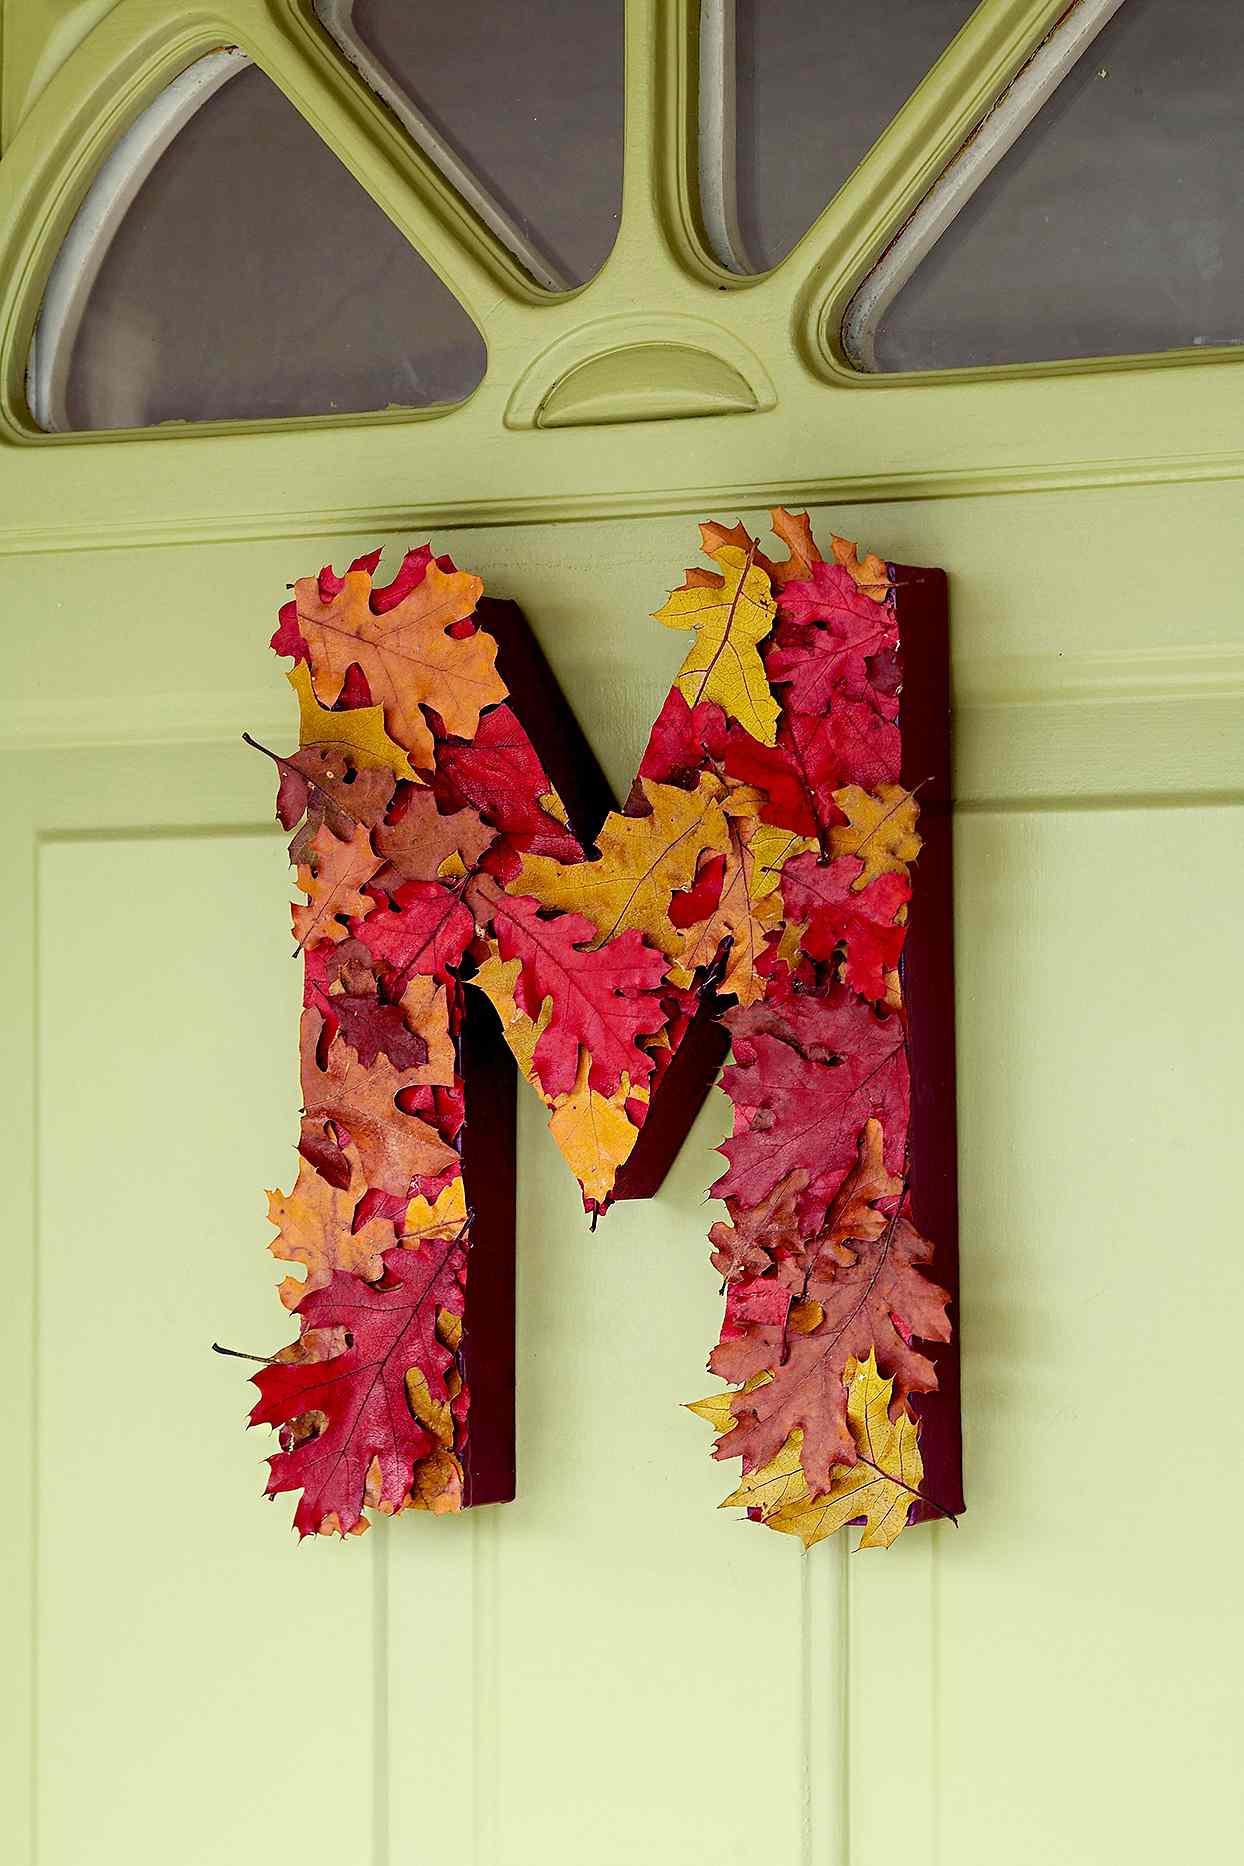 Leaves in the shape of an "M" on front door